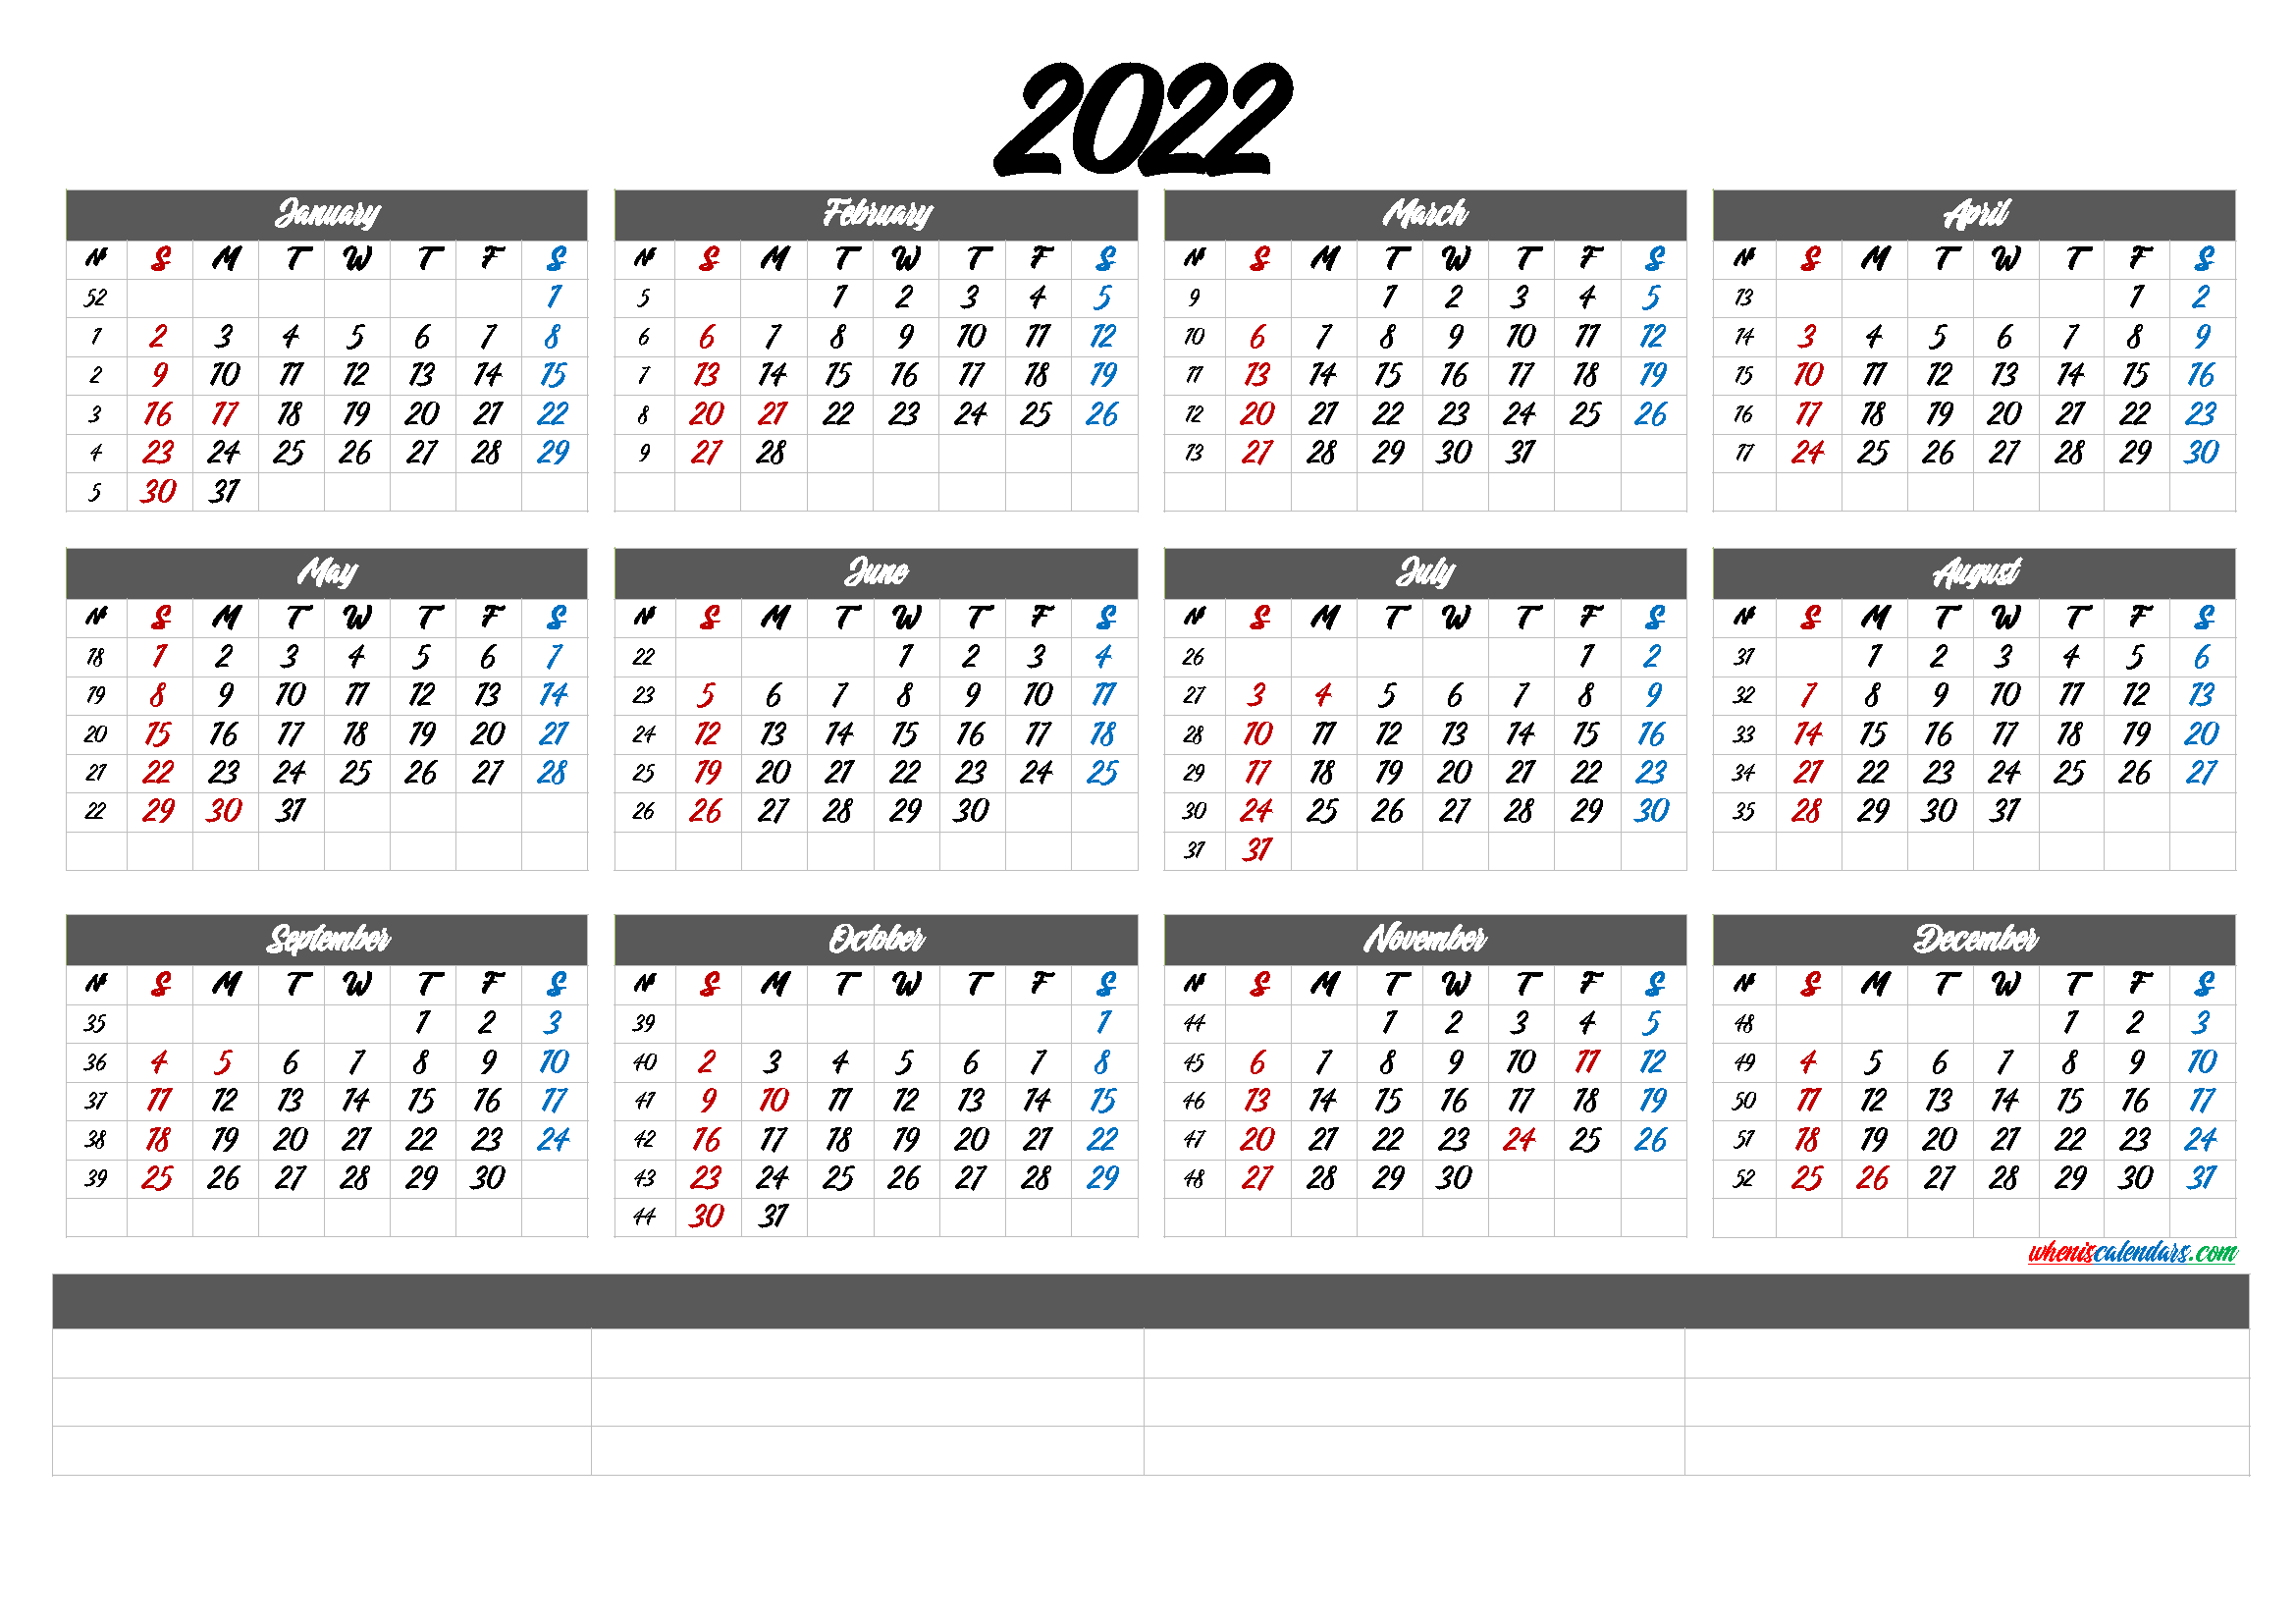 Free Printable 2022 Calendar by Month (6 Templates) - Free ...